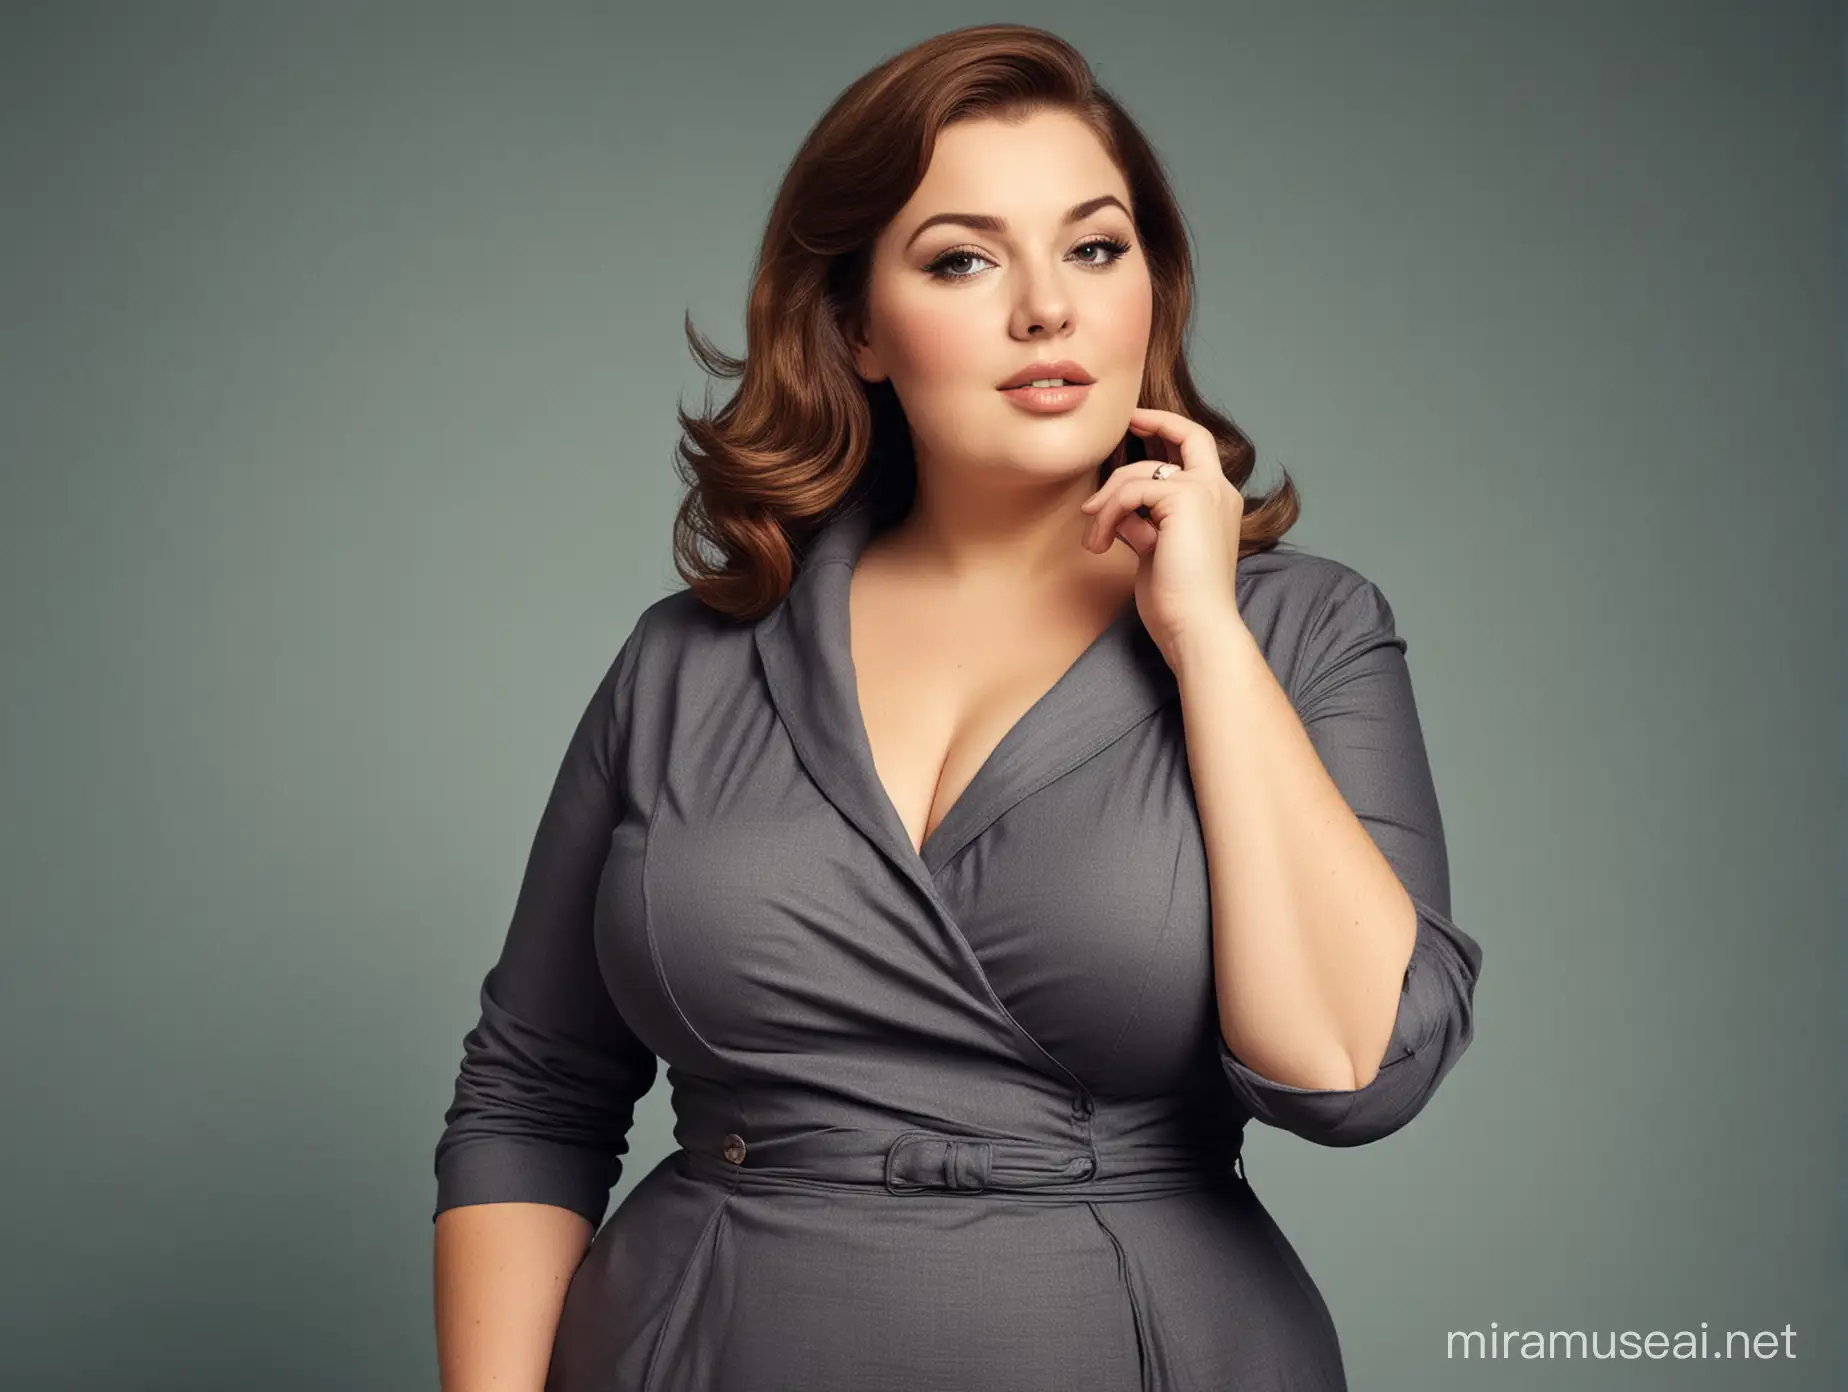 a single plus size woman in 60s, well clothed, beautiful, attractive.